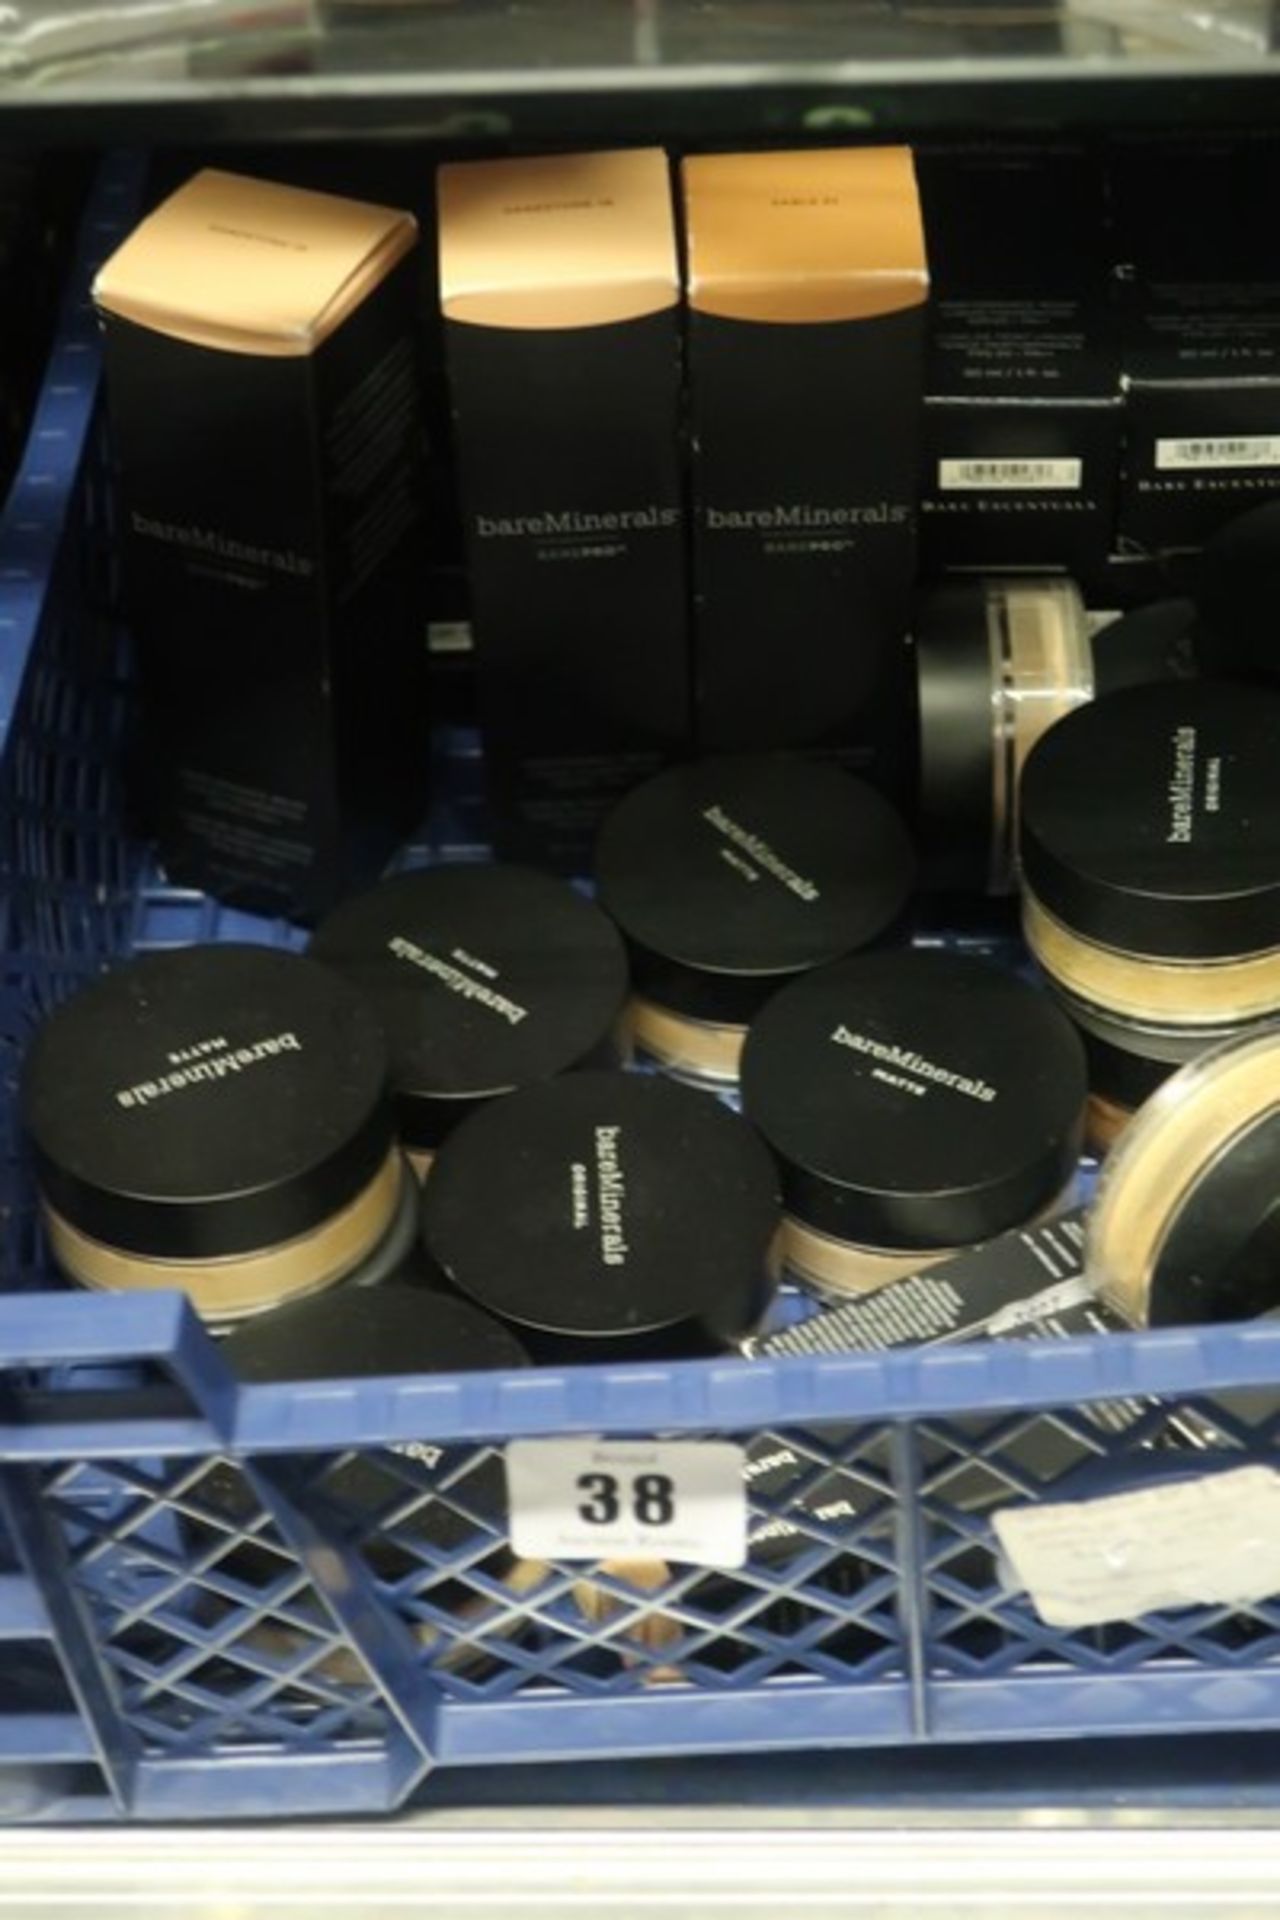 A quantity of BareMinerals performance wear liquid foundations various shades, loose powder